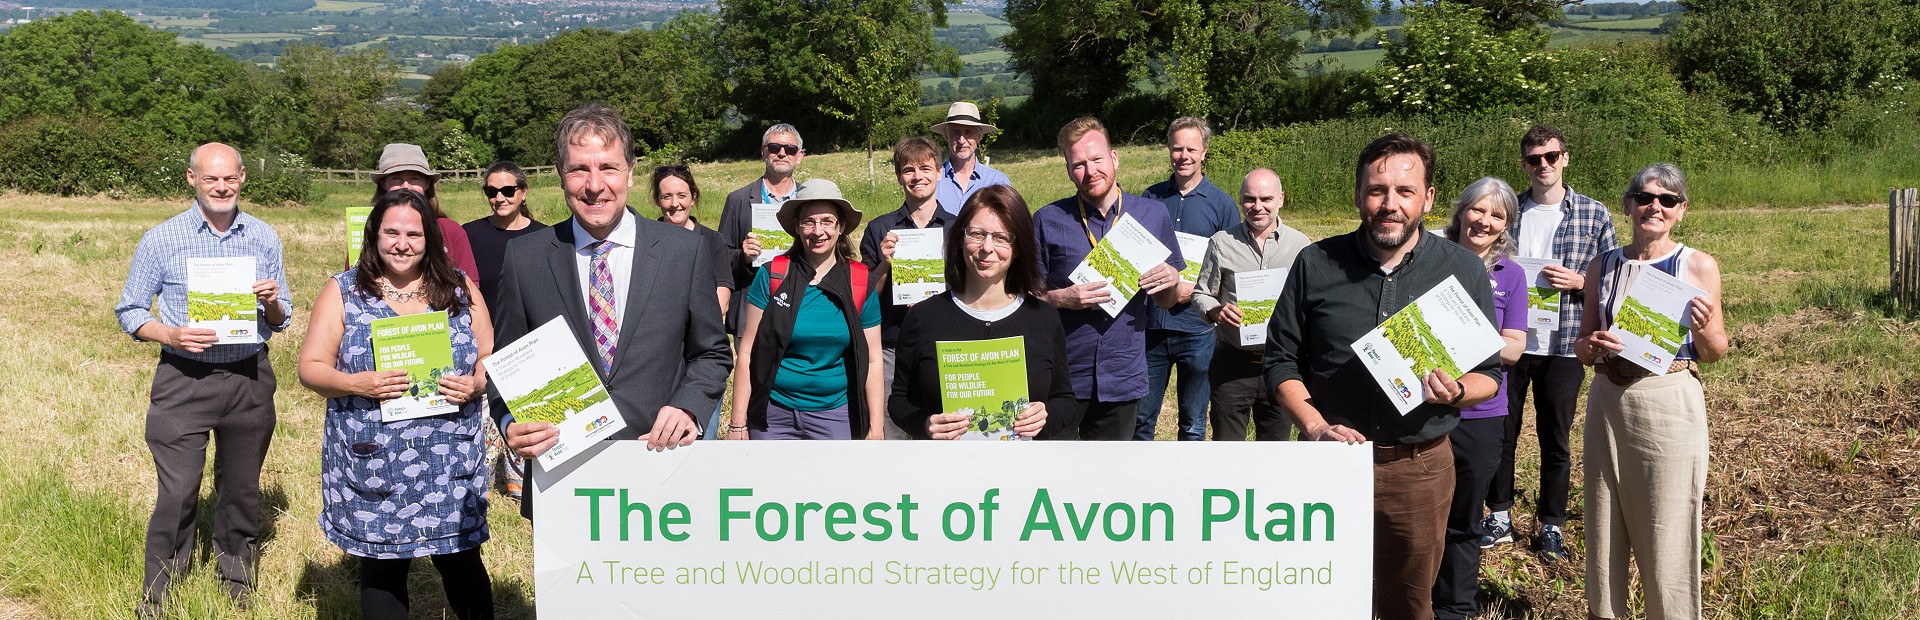 The Forest of Avon Plan